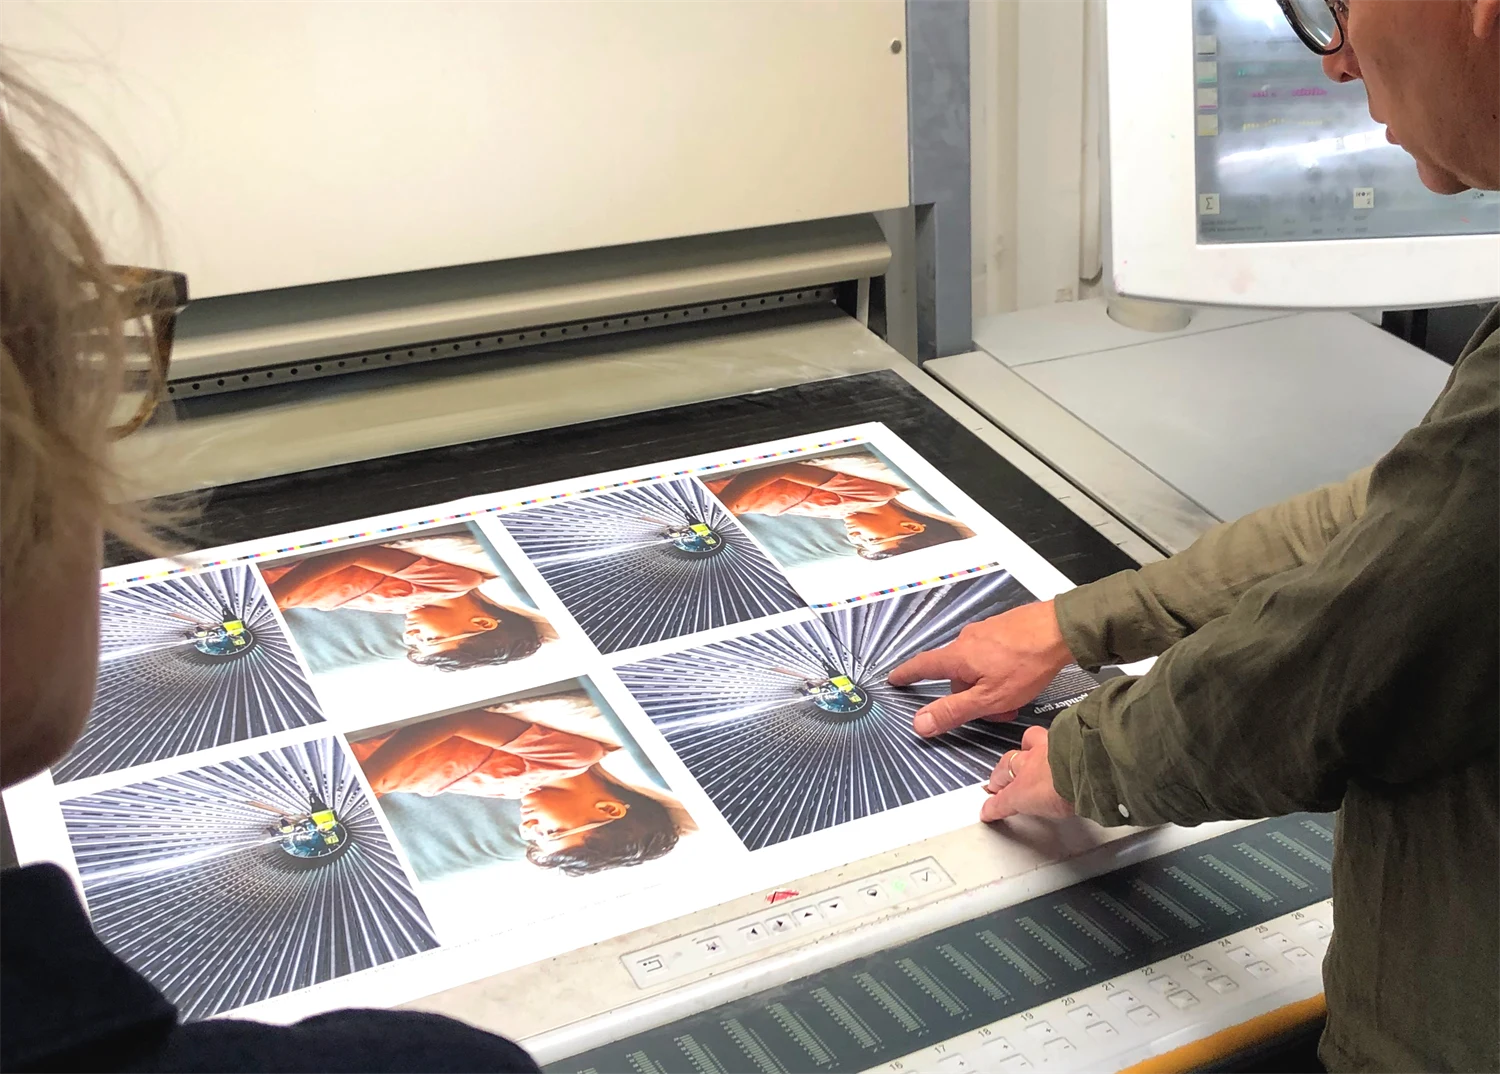 Printing an image across a spread